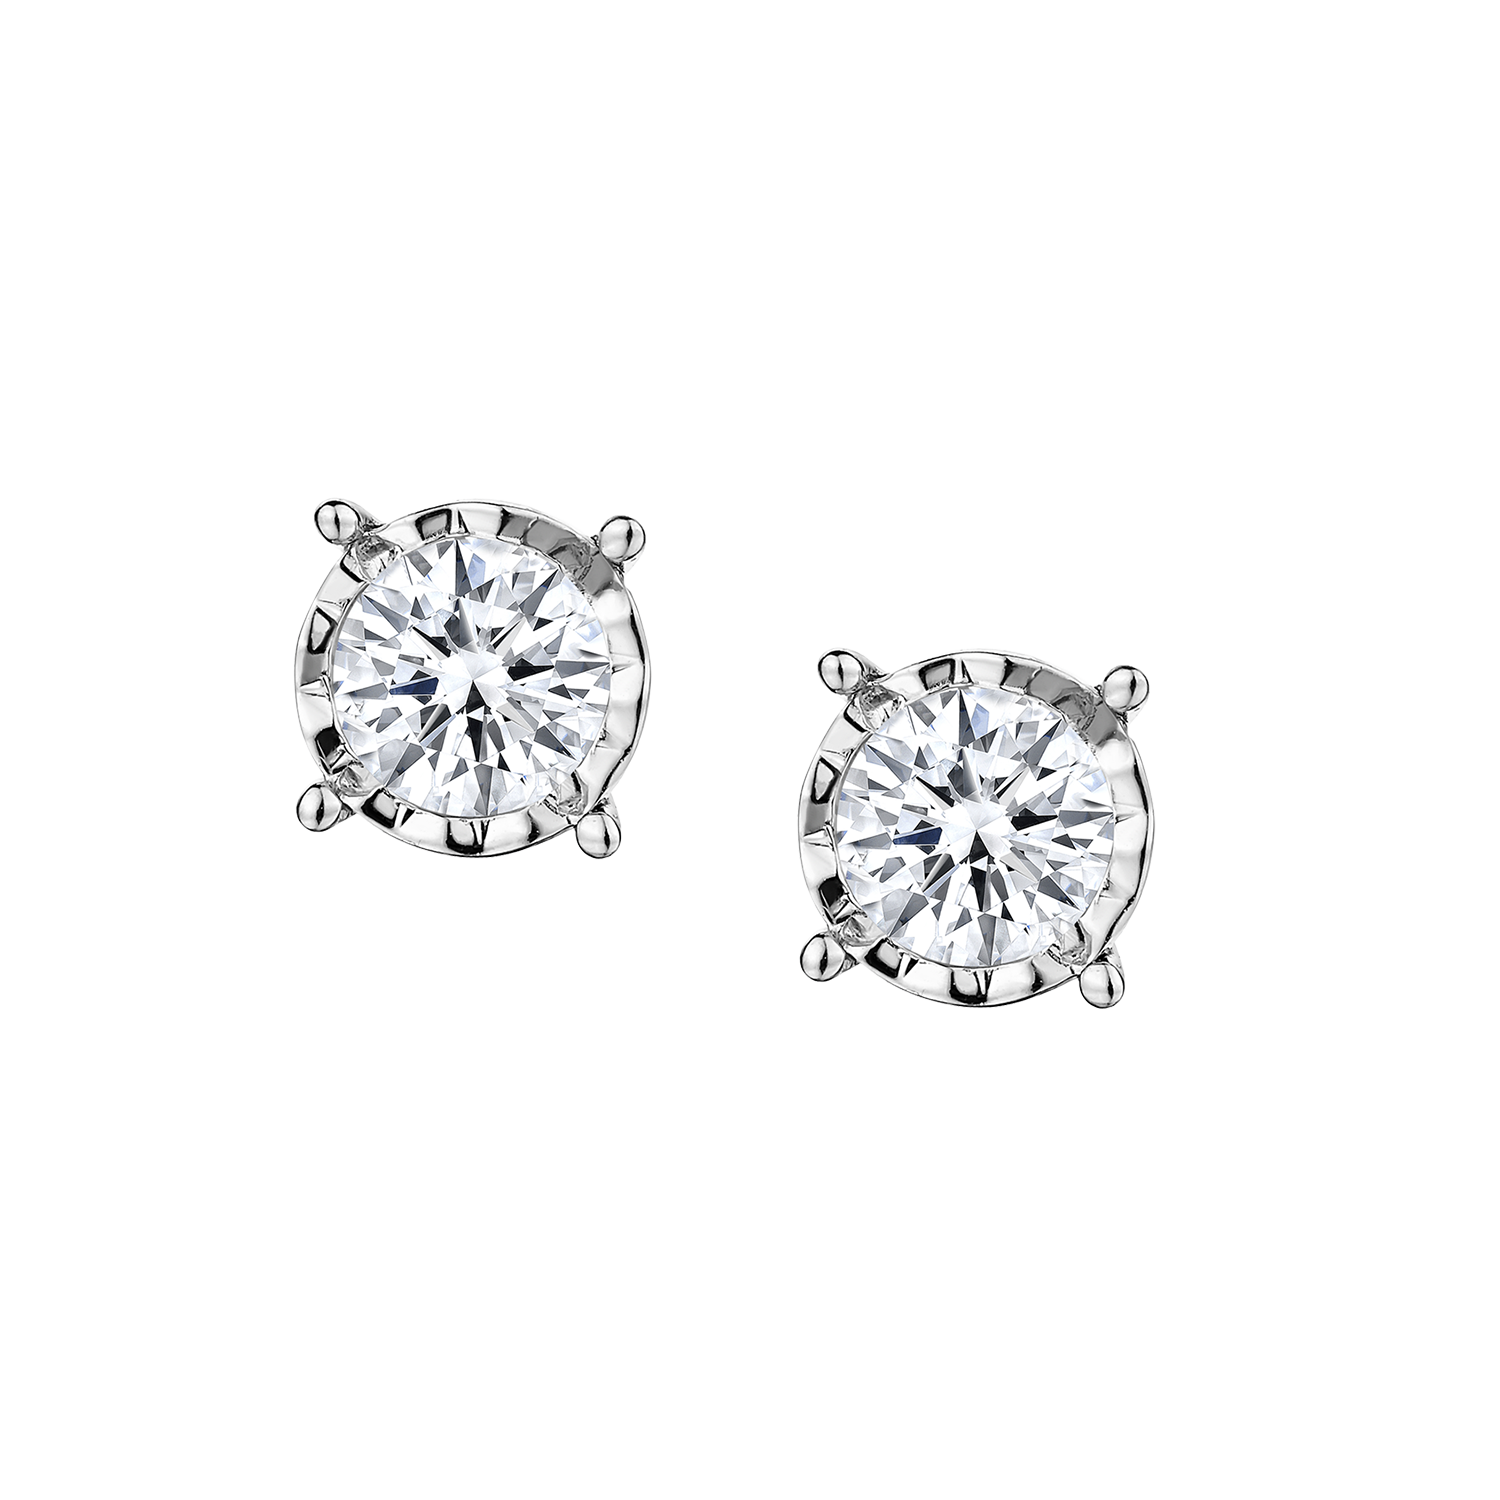 1.00 Carat of Diamonds "Miracle" Earrings, 14kt White Gold......................NOW